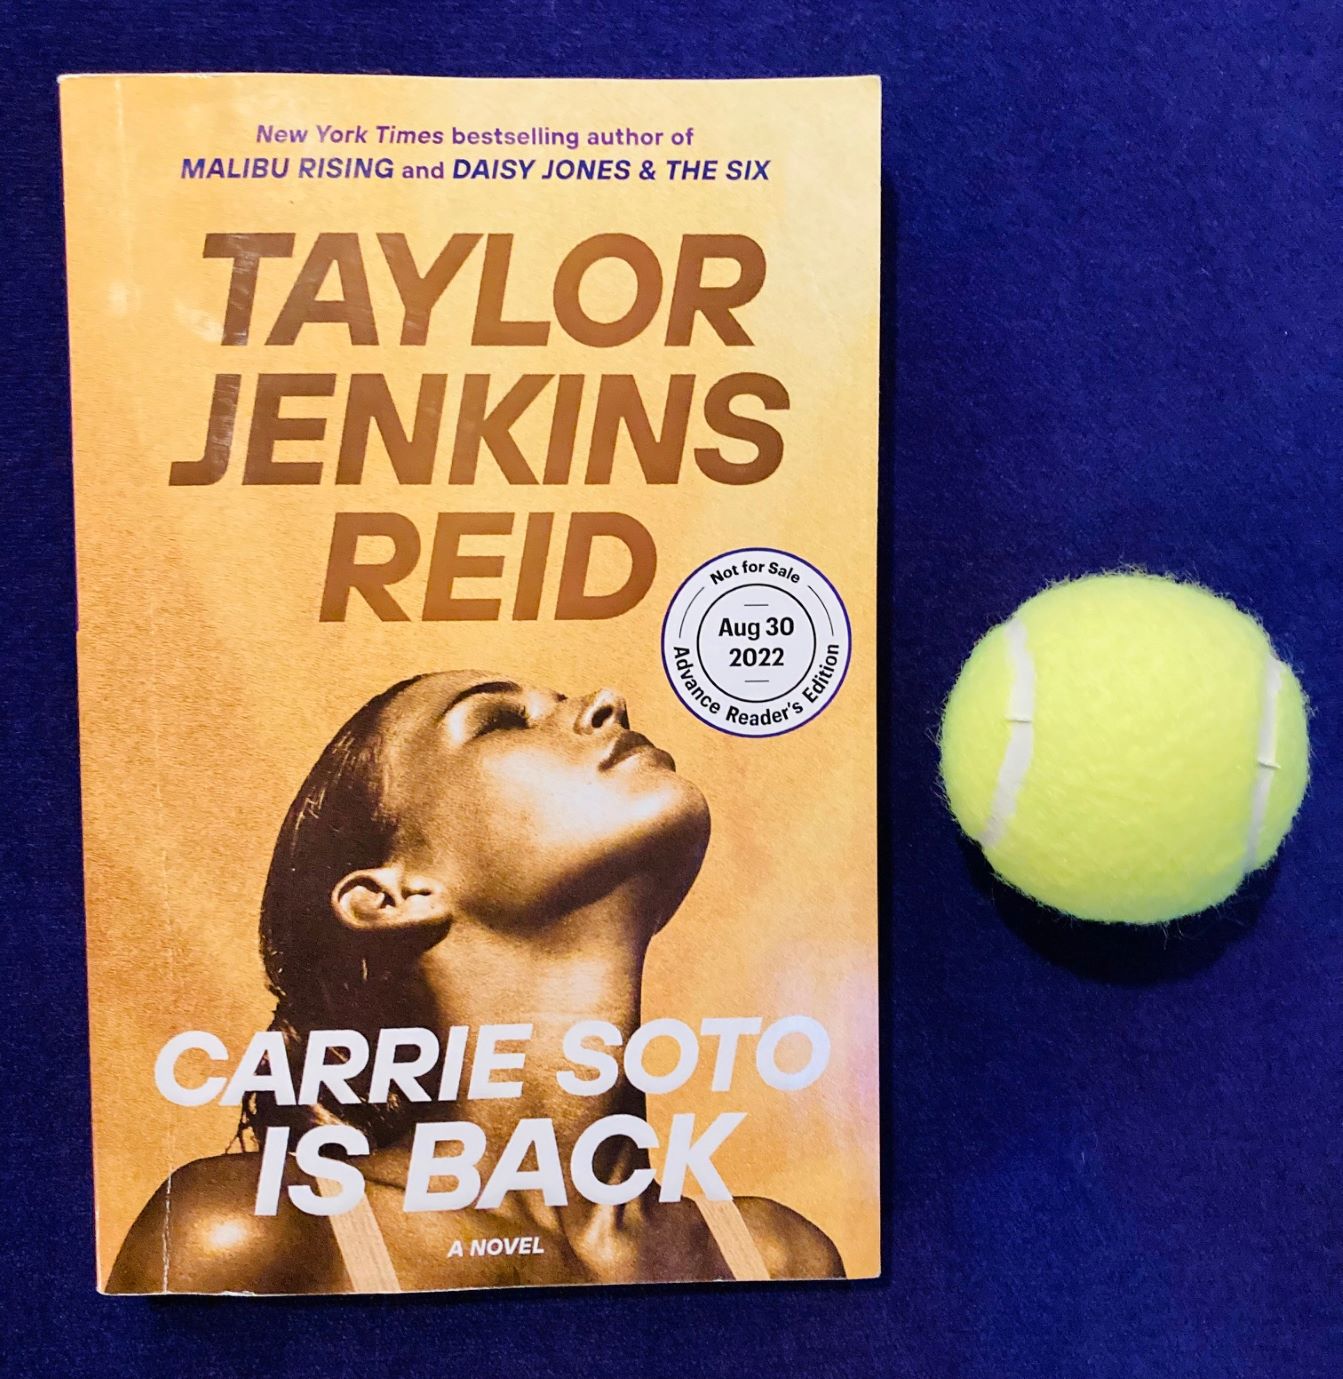 picture of Carrie Soto is Back by Taylor Jenkins Reid, on a purple background with a yellow tennis ball beside the book